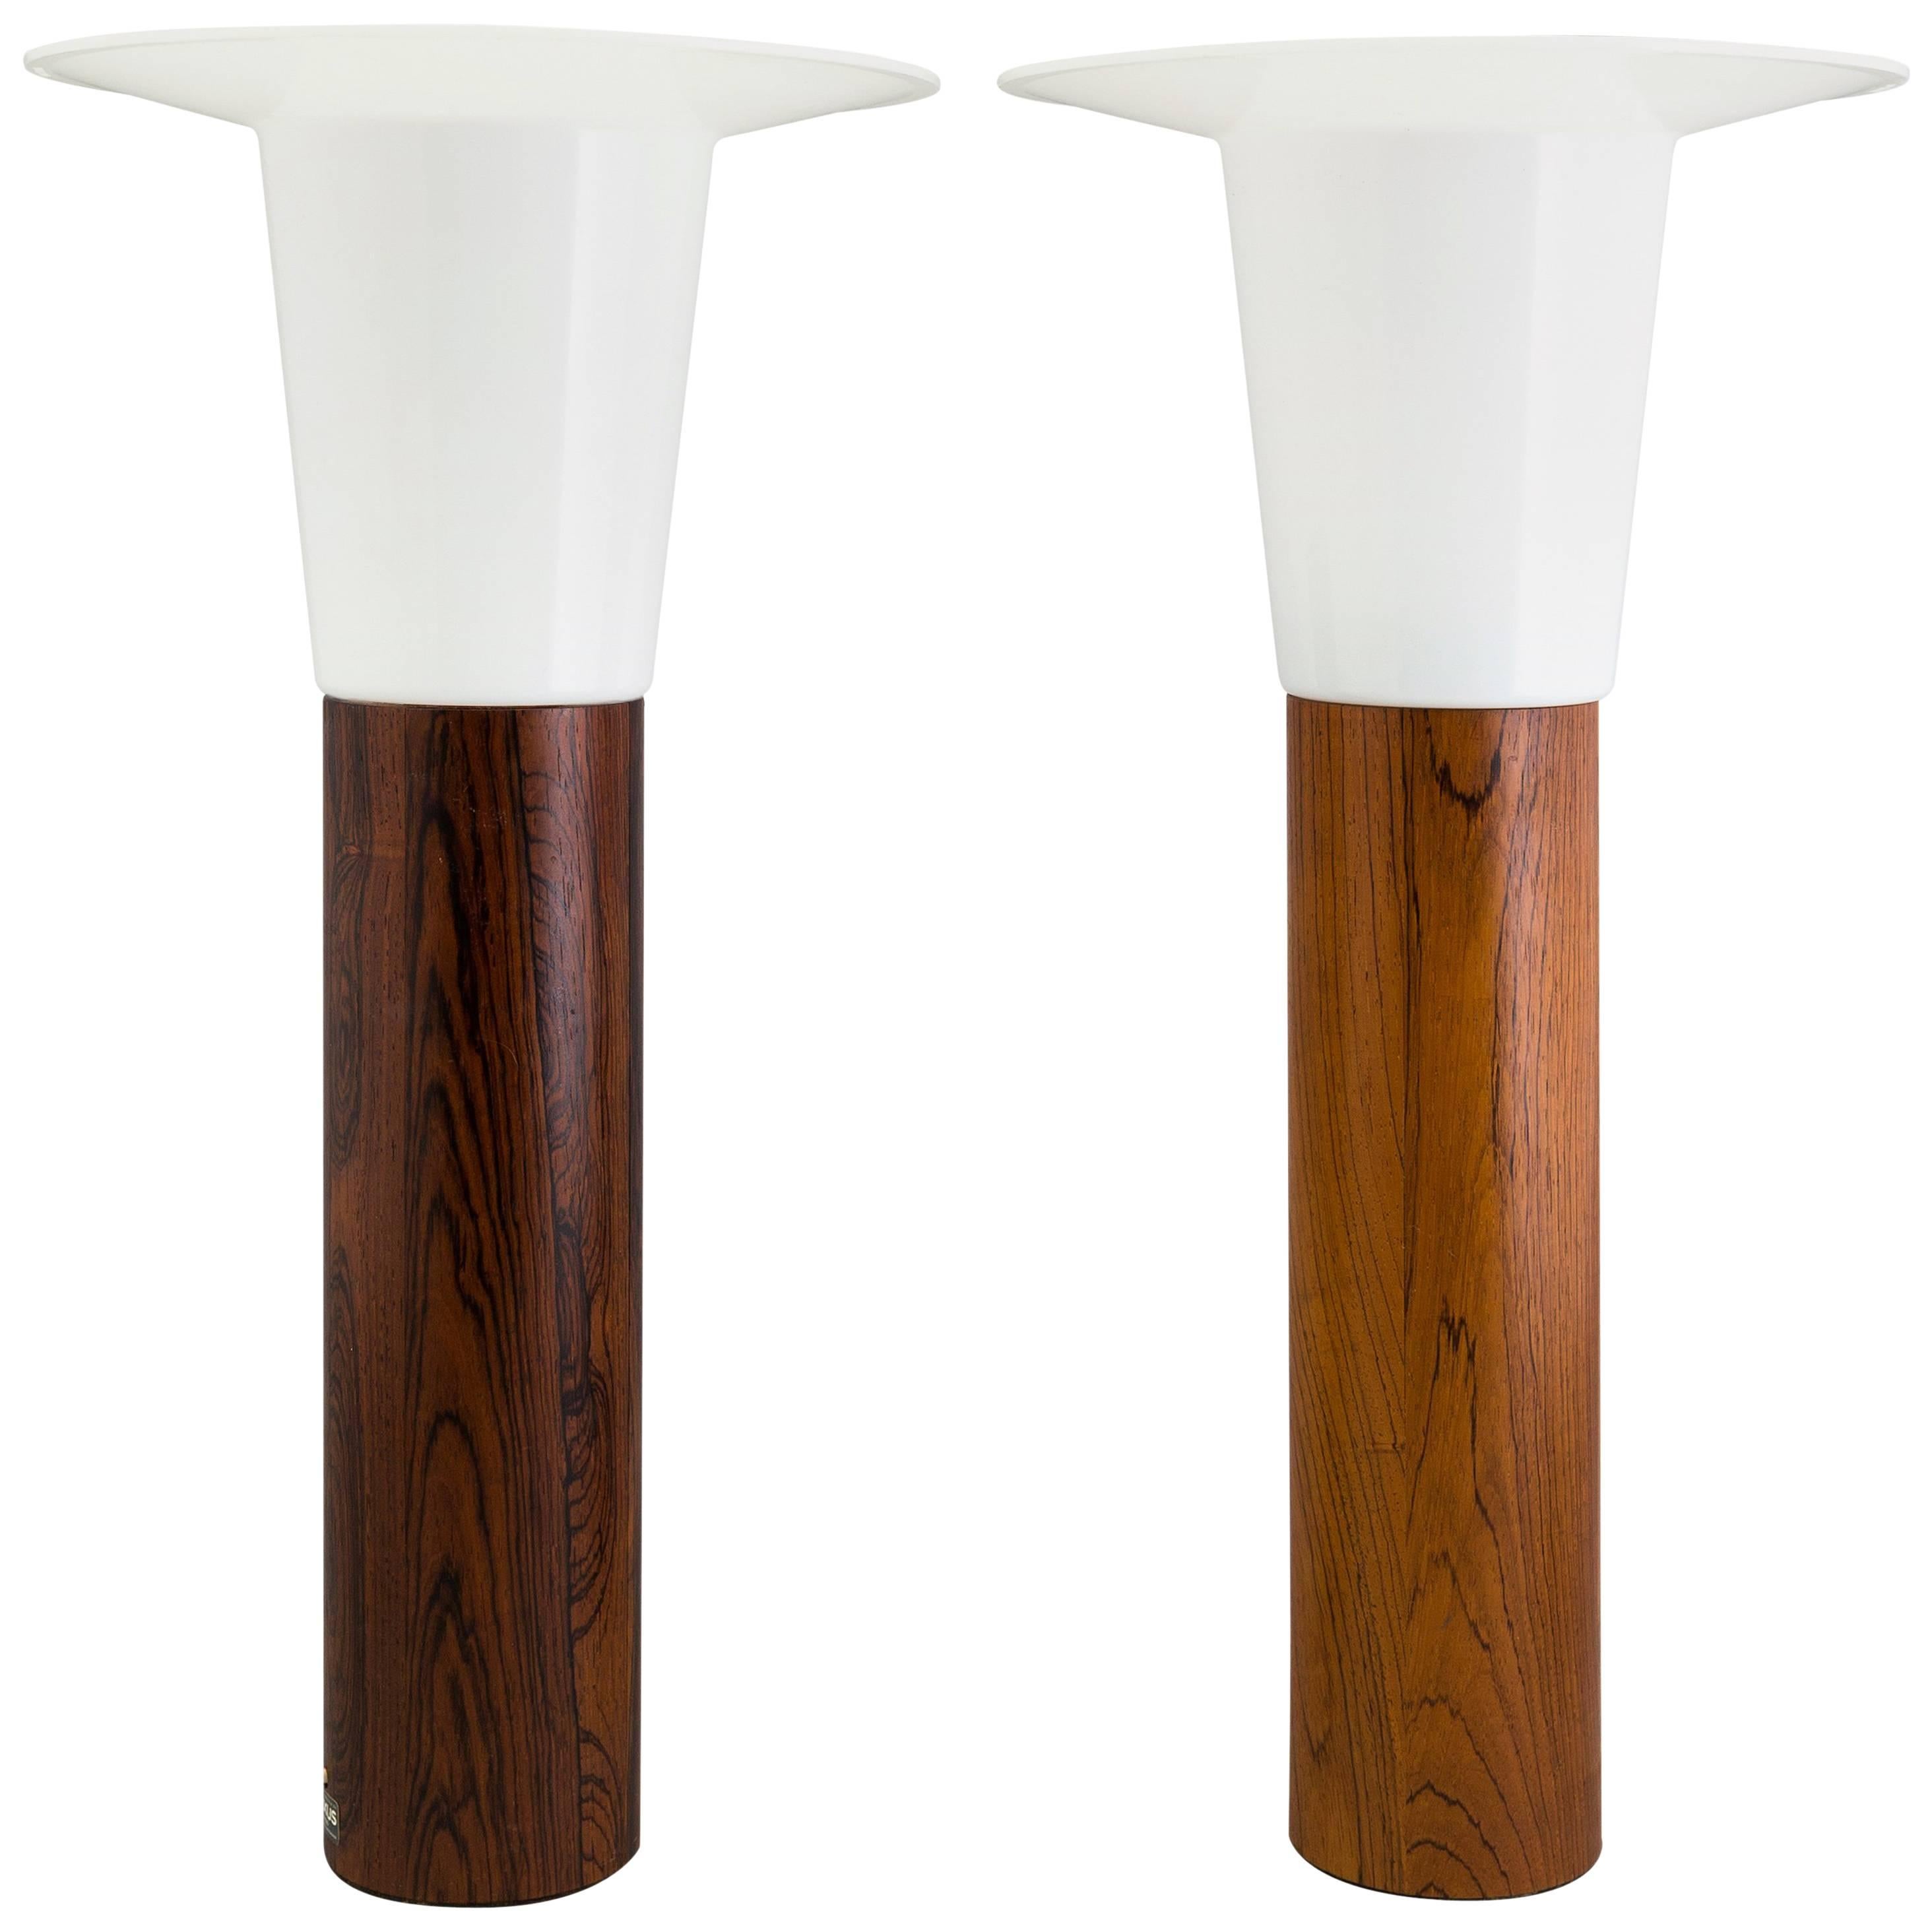 Rosewood Scandinavian Table Lamps by Uno & Osten Kristiansson for Luxus